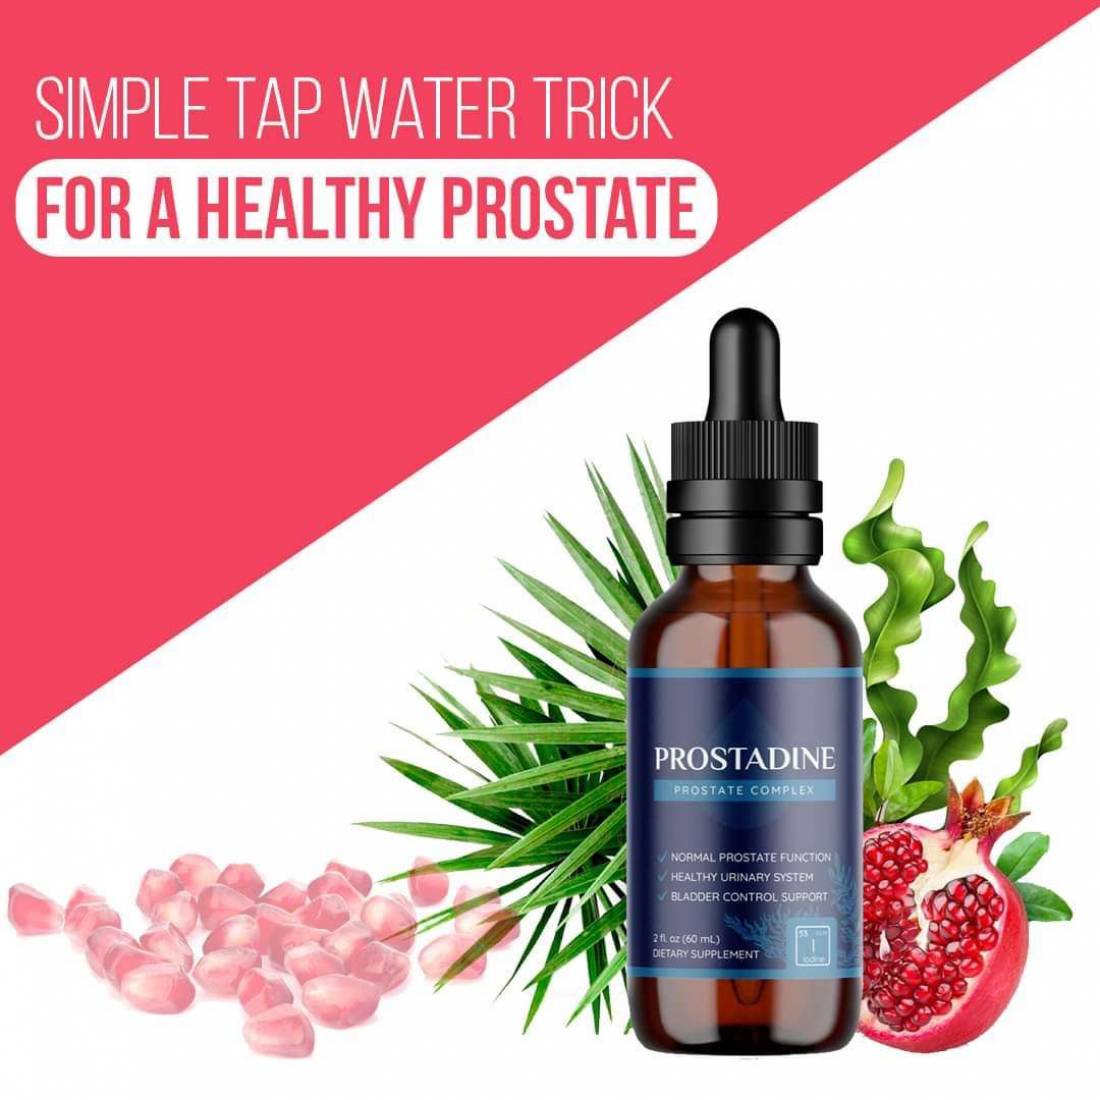 Is Prostadine A Good Product